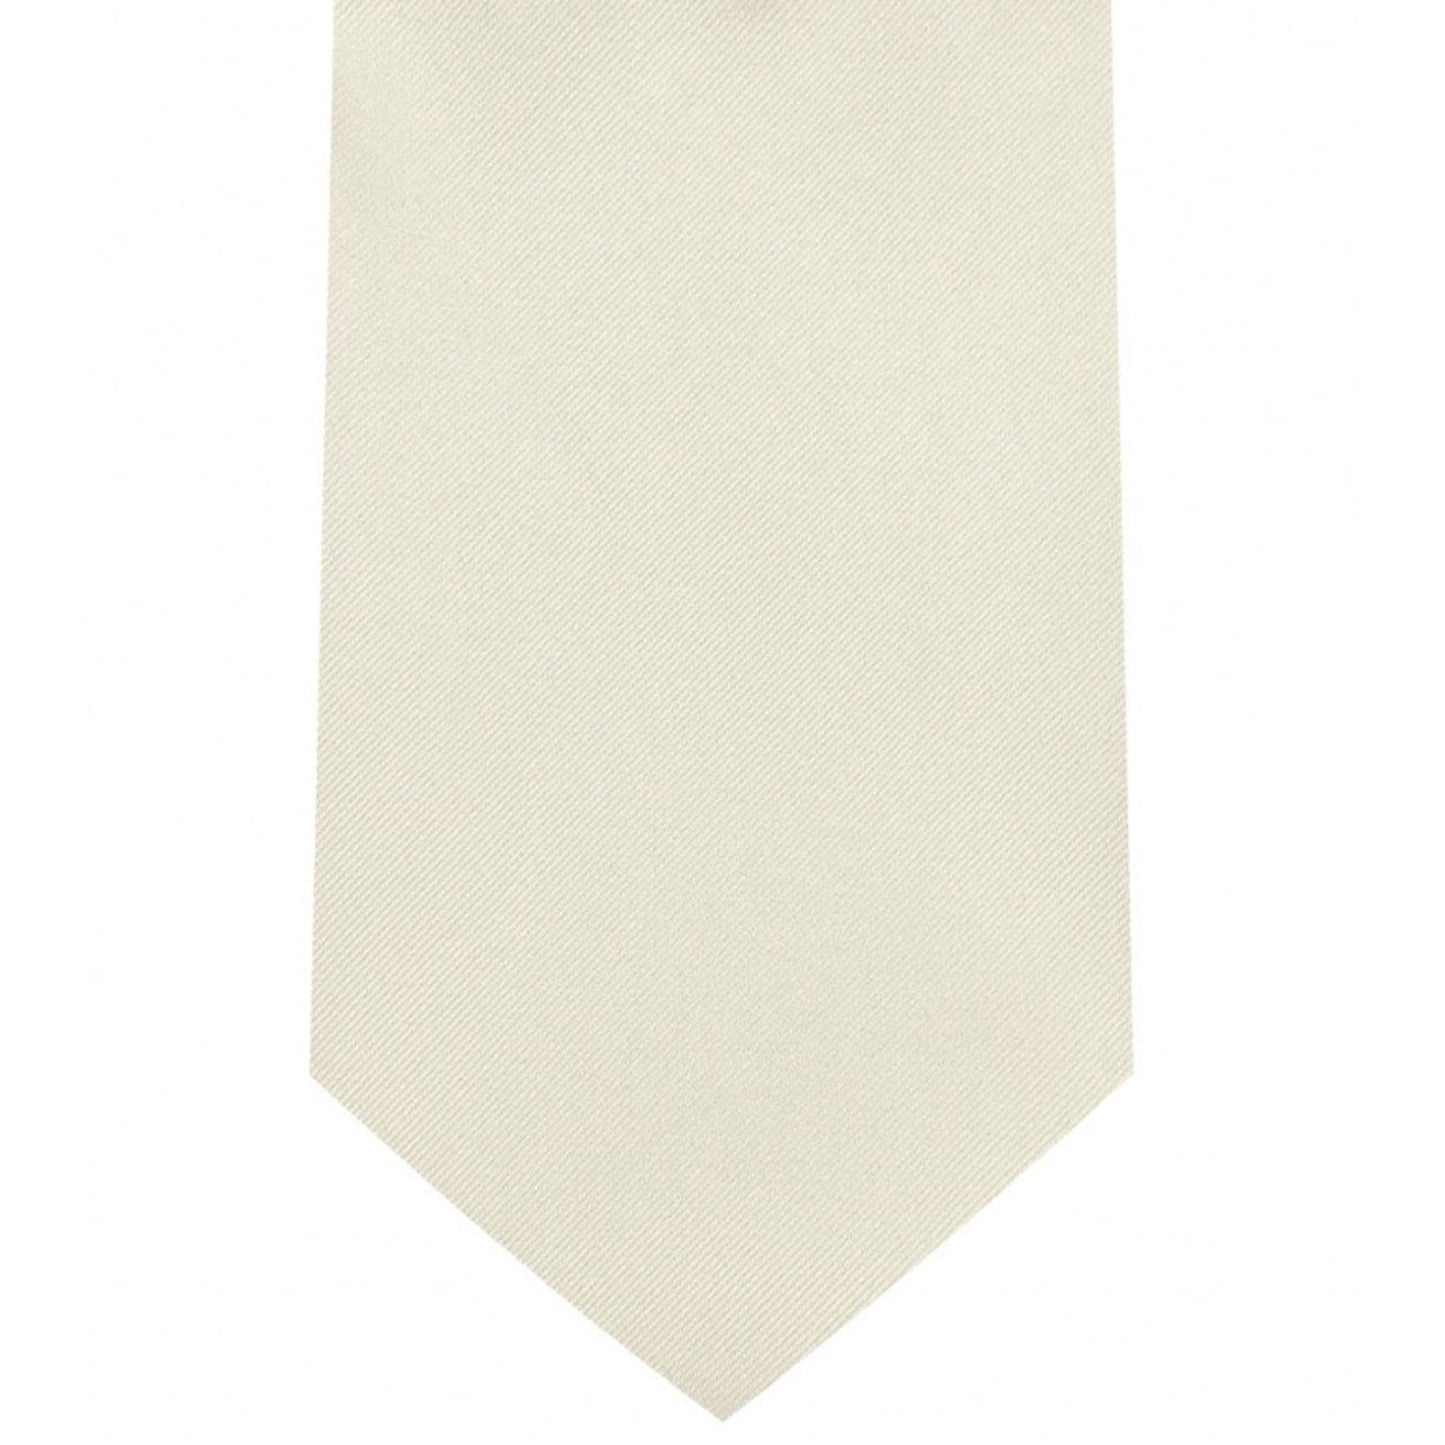 Classic Ivory Tie Regular width 3.5 inches With Matching Pocket Square | KCT Menswear